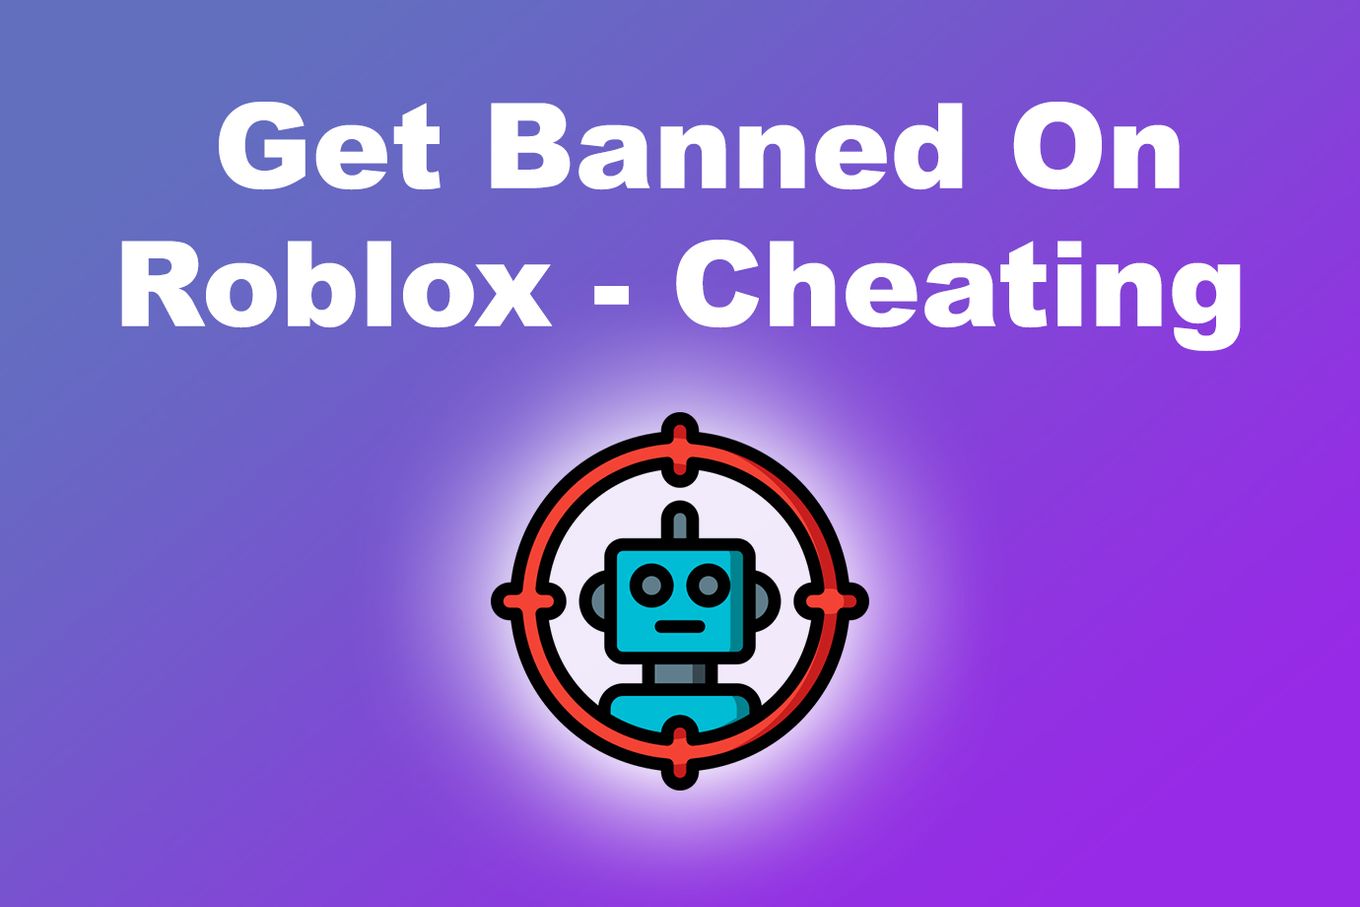 Cheating - Get Banned On Roblox